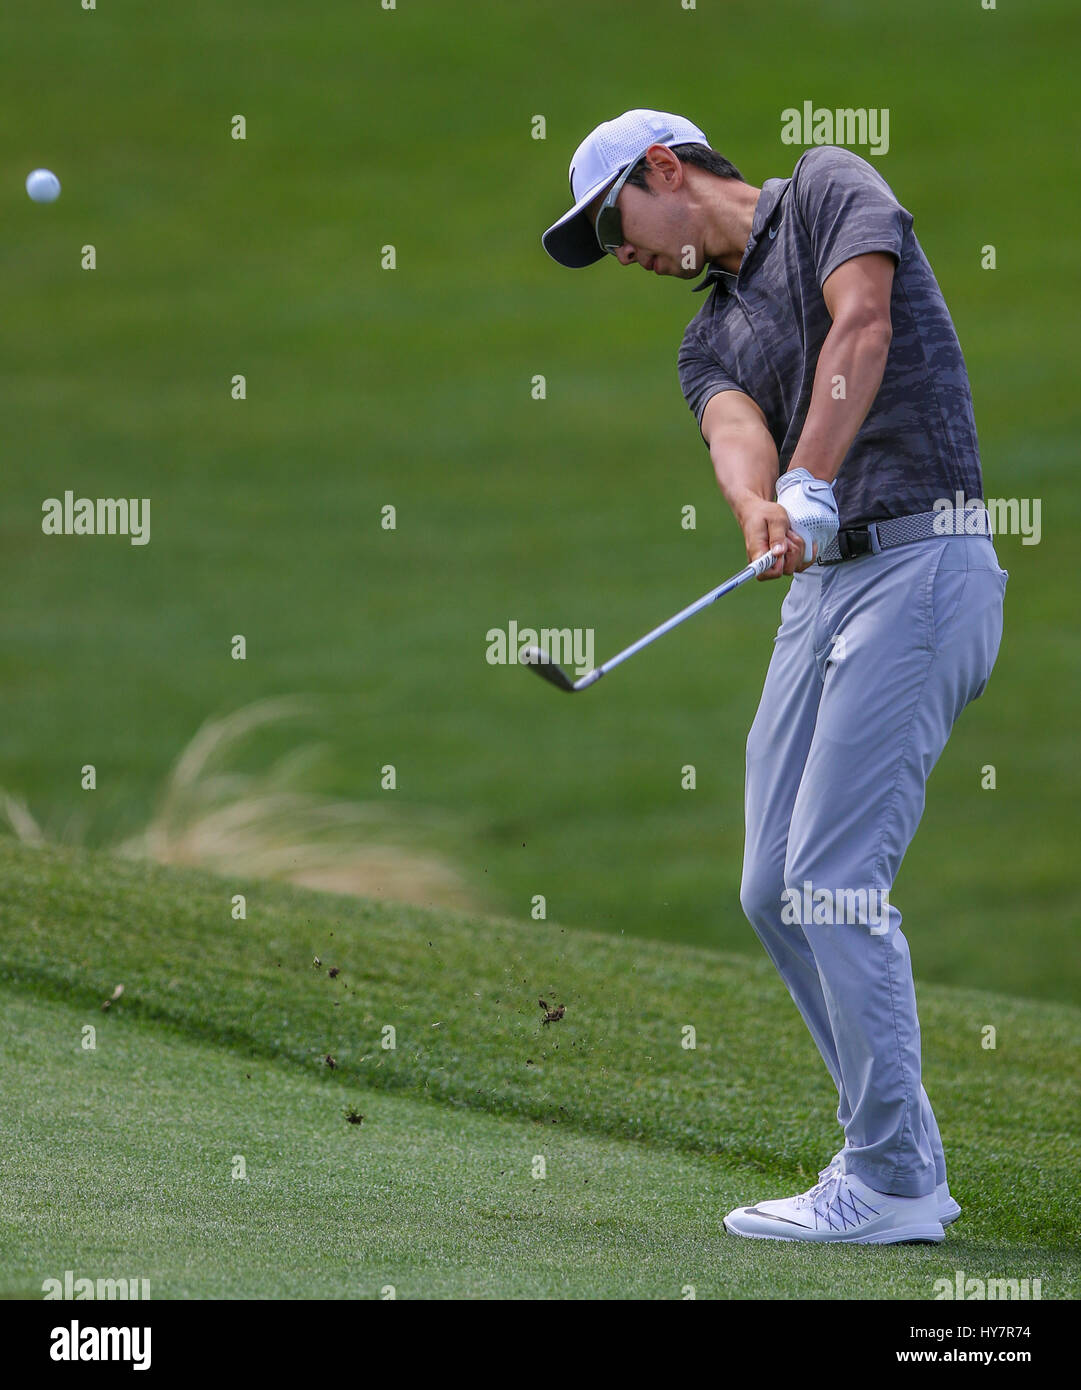 Humble, Texas, USA. 1st Apr, 2017. Seung-Yul Noh hits a shot on the fairway during the third round of the Shell Houston Open at the Golf Club of Houston in Humble, Texas. John Glaser/CSM/Alamy Live News Stock Photo